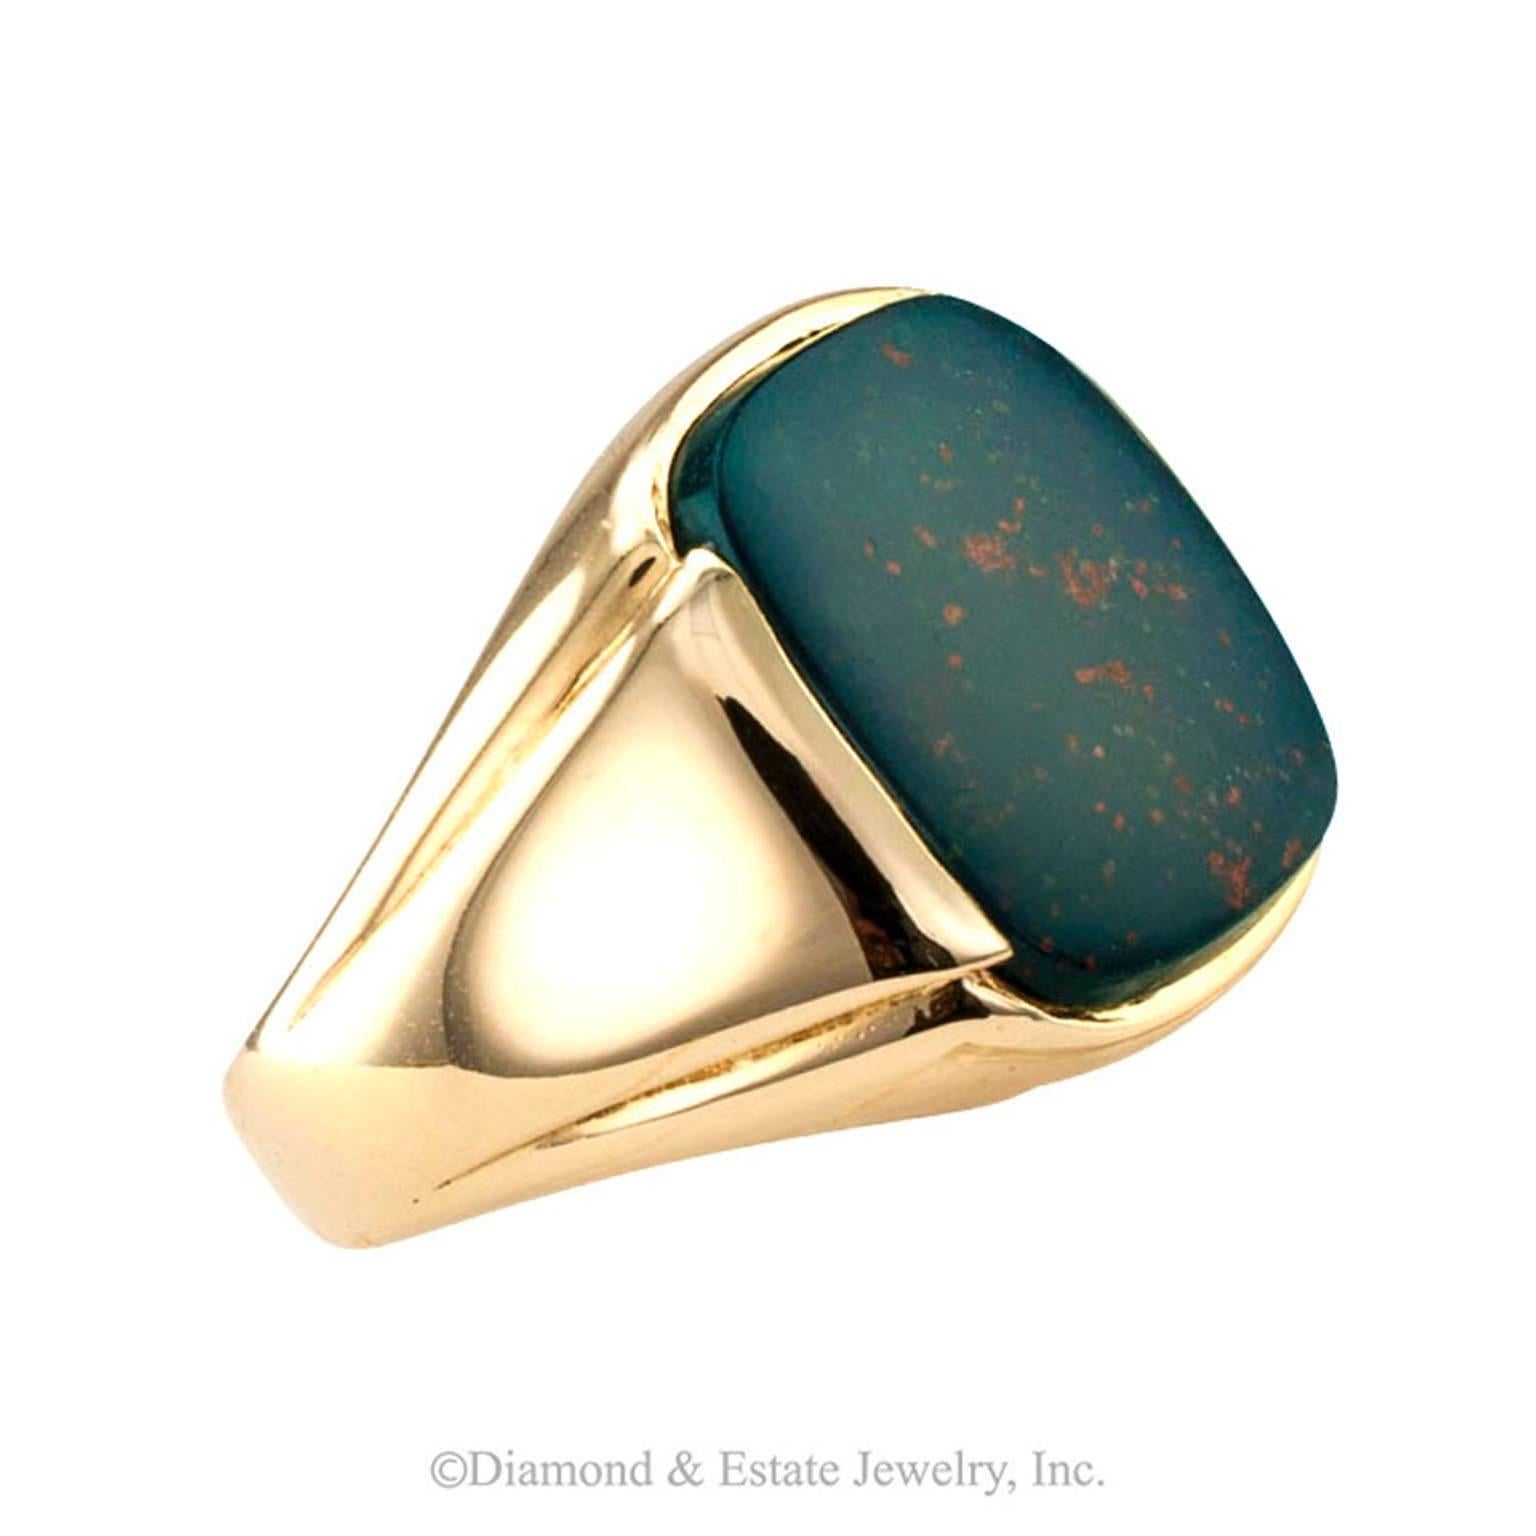 1940s Bloodstone Gentleman's Ring

A classic gentleman's ring featuring a fine bloostone specimen with an abundance of pronounced reddish markings, a very desirable quality.  Bloodstone is a form of chalcedony.  On the internet, there is a